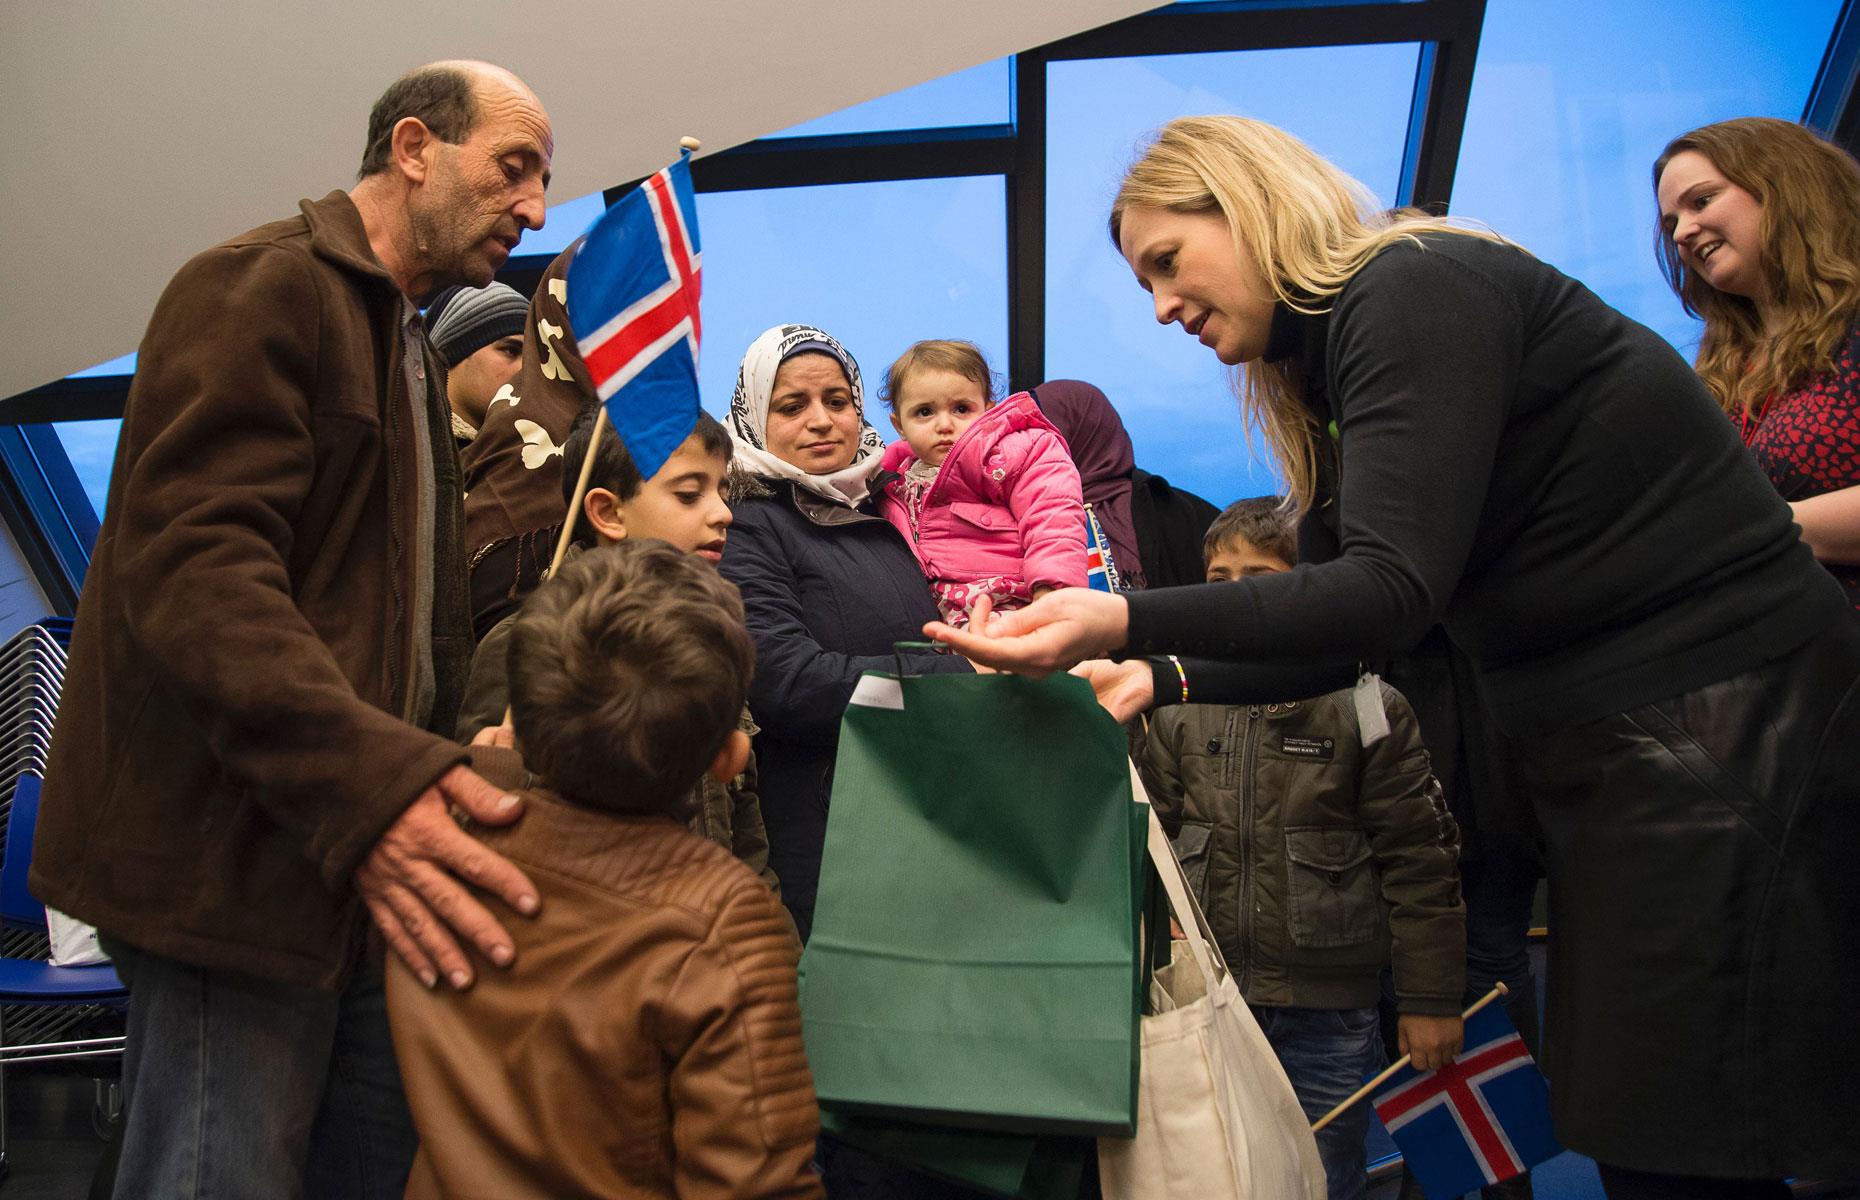 Research on how Syrian refugees are treated in Iceland: $40,000